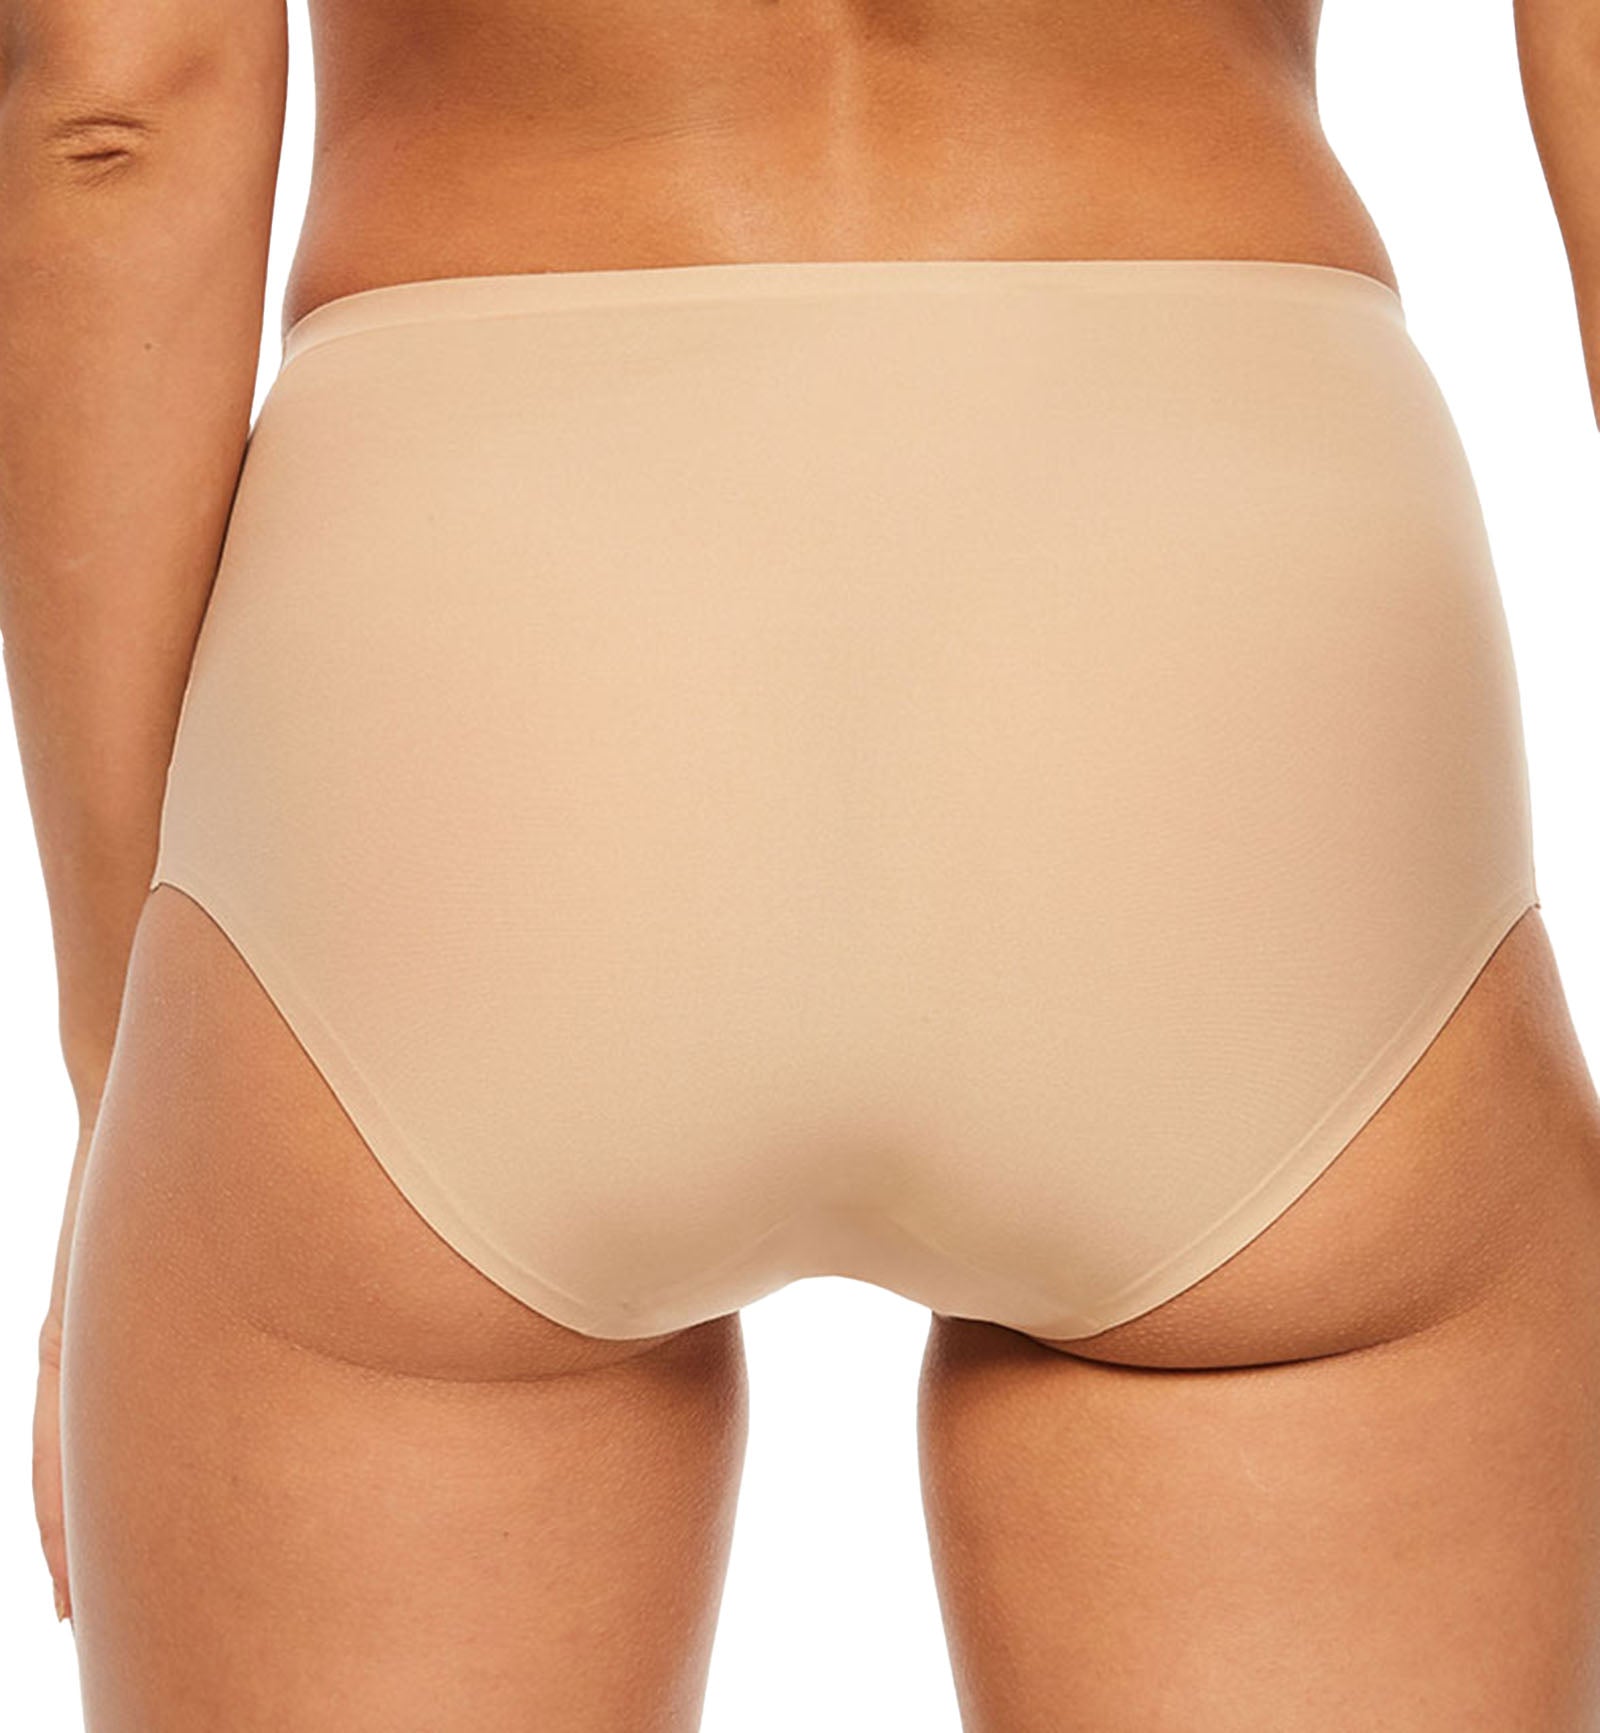 Chantelle Softstretch Brief (C26470),Ultra Nude - Ultra Nude,One Size